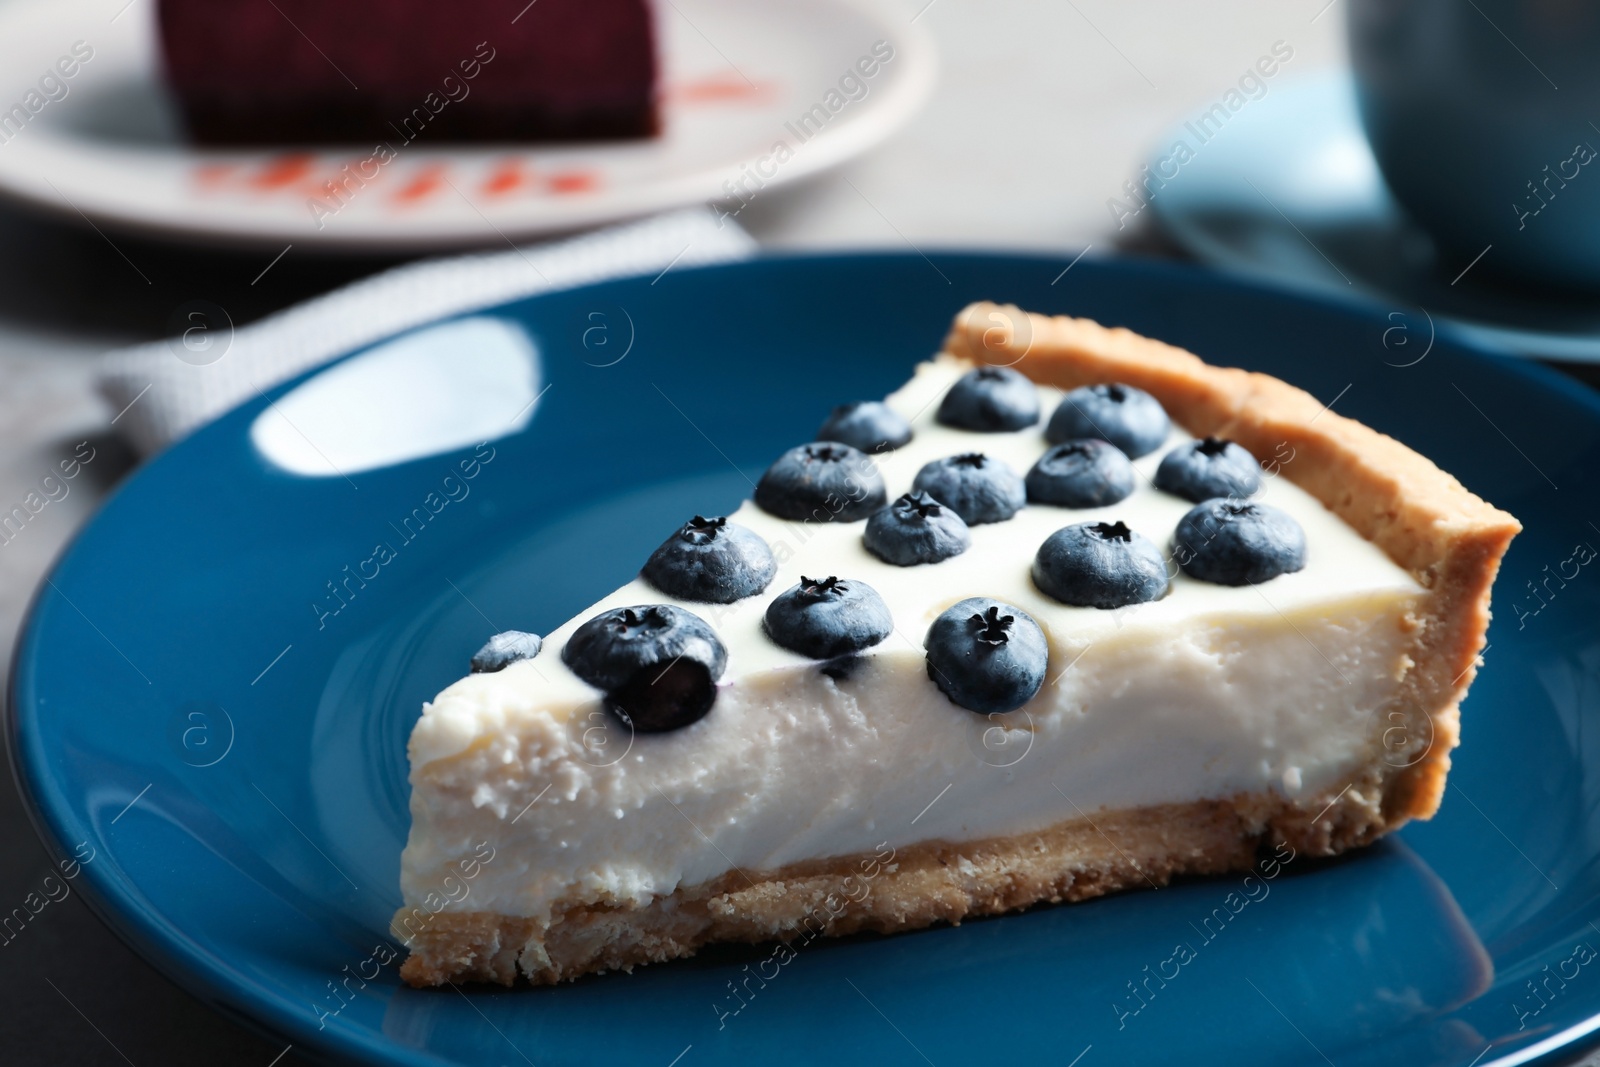 Photo of Plate with piece of tasty blueberry cake on table